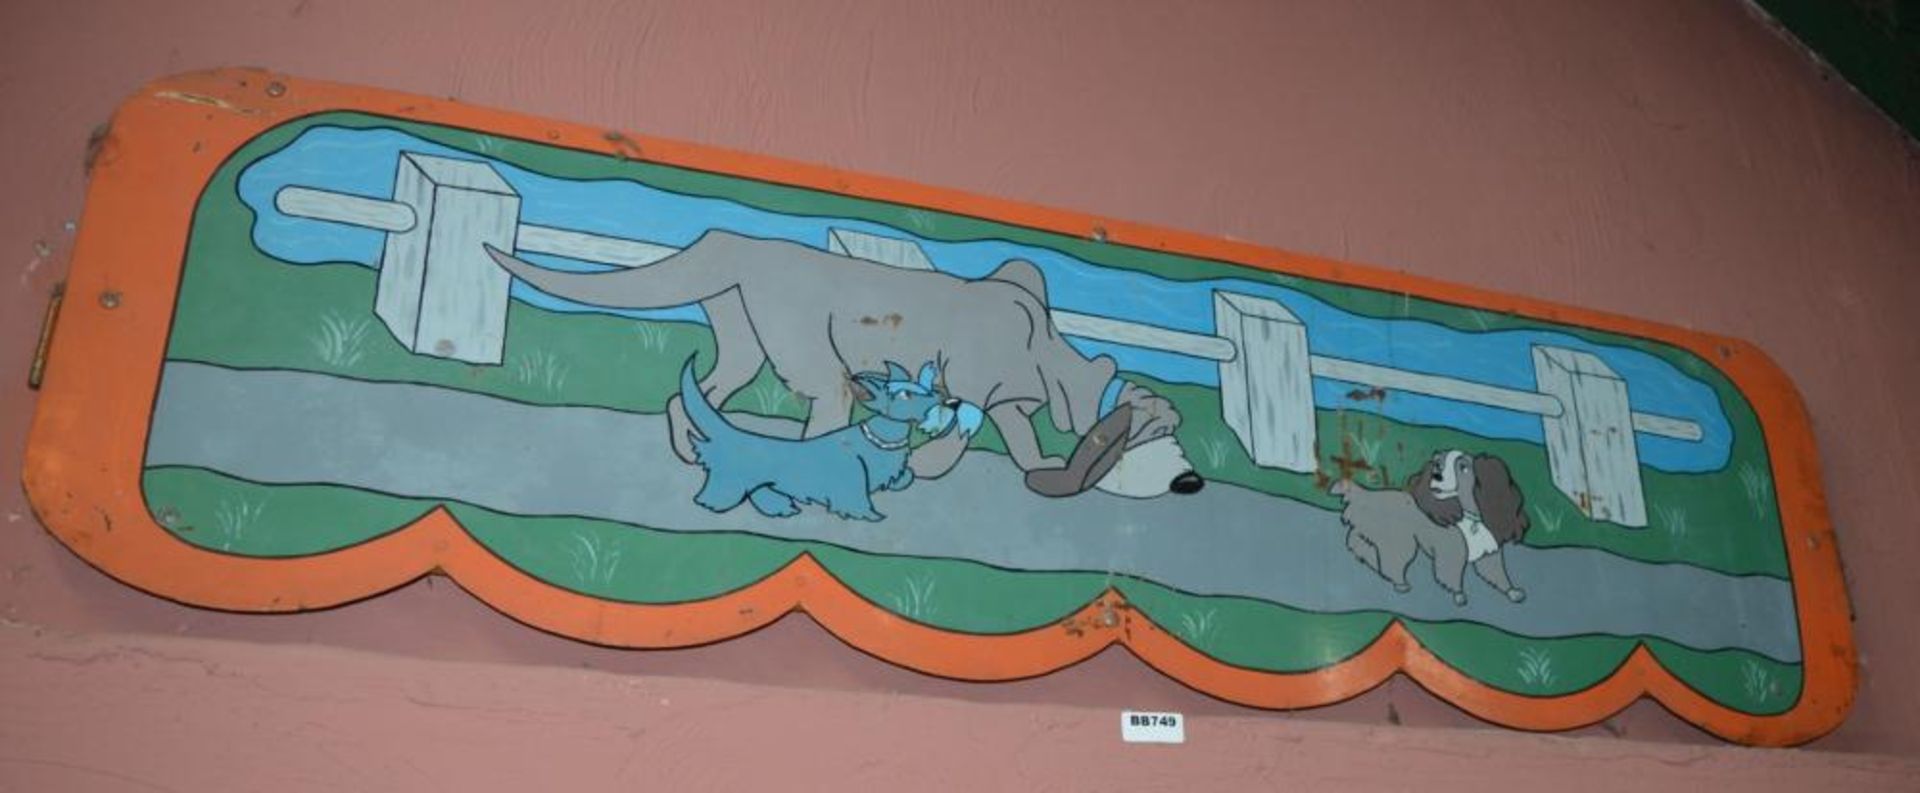 1 x Vintage Metal Hand Painted Fairground Ride Barrier Fence Panel With Braced Back and Mounting Hoo - Image 2 of 7